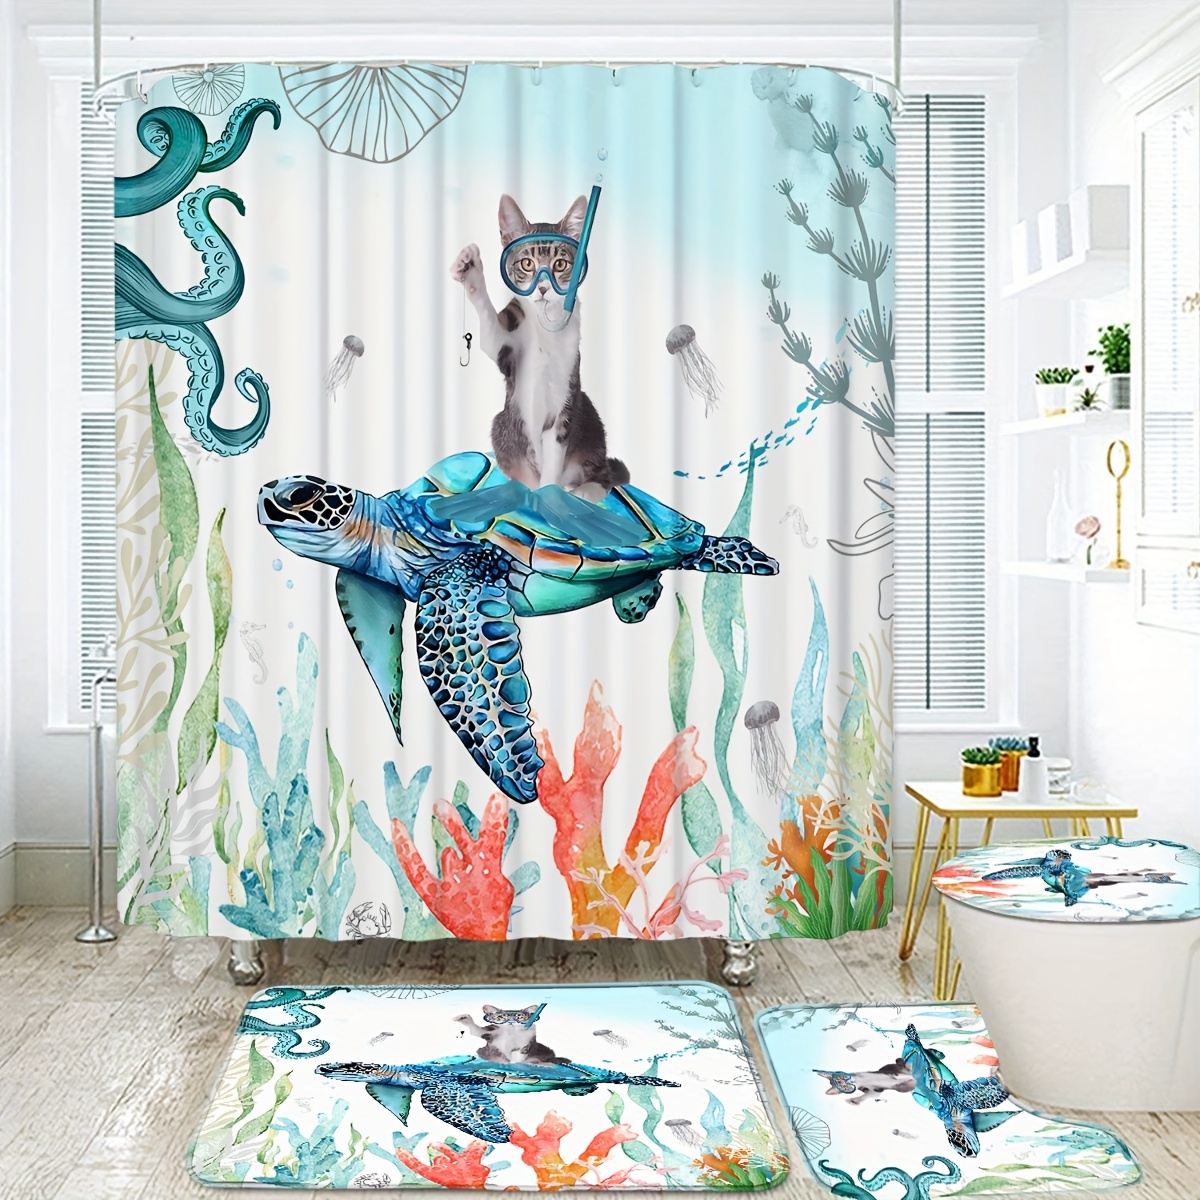 

Whimsical Kitty And Turtle Bathroom Set: Includes 70.8x70.8in Shower Curtain, 12 Free Hooks, And 4 Cozy Bath Mats - Perfect For A Fun And Playful Bathroom Decor!